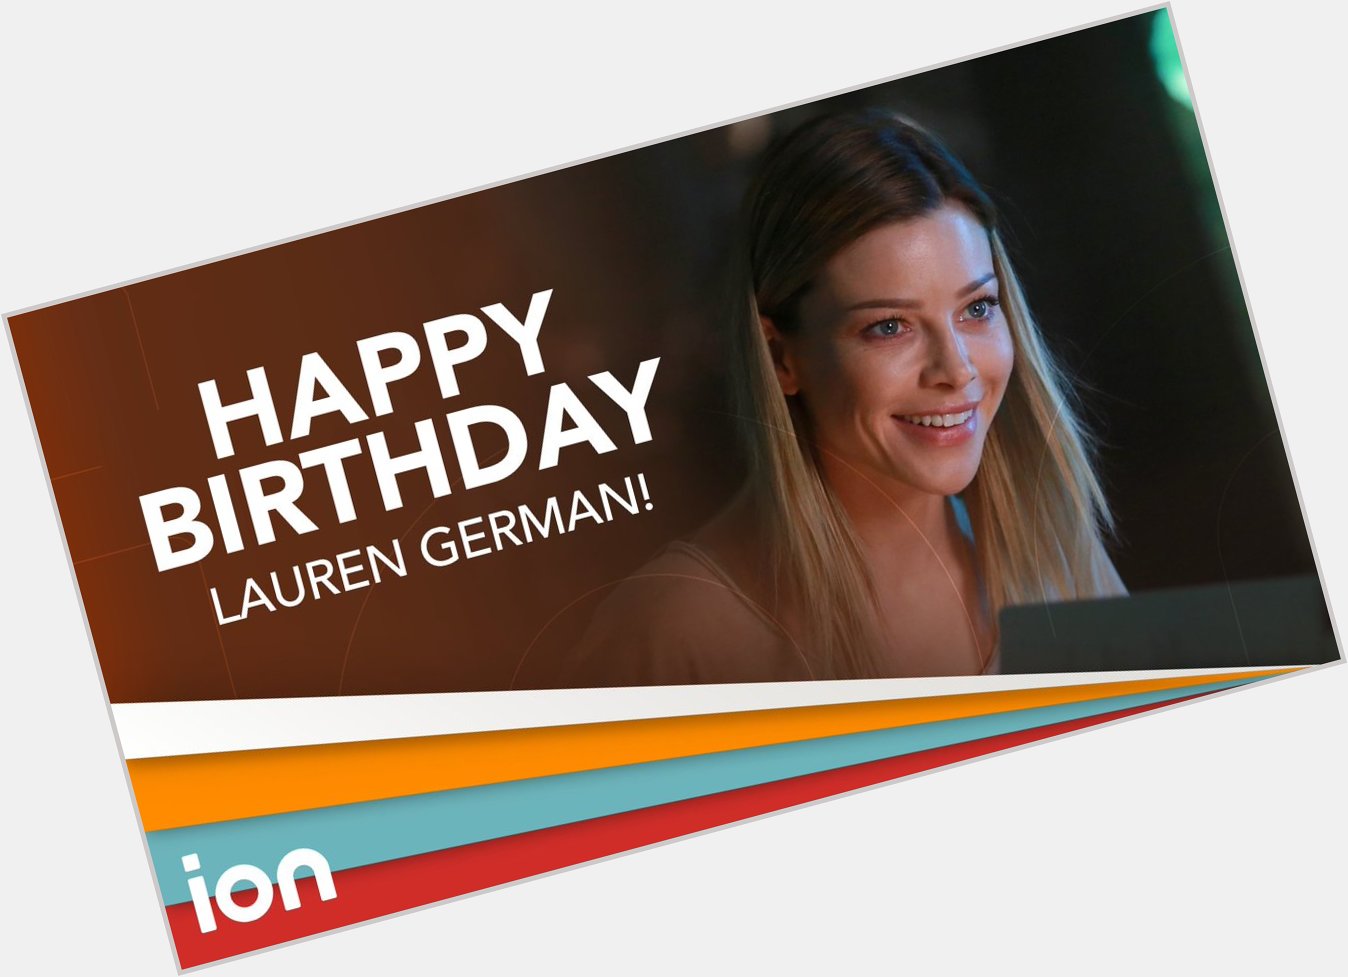 Happy birthday Lauren German! Reply with your favorite Leslie Shay GIFs below to celebrate with us! 